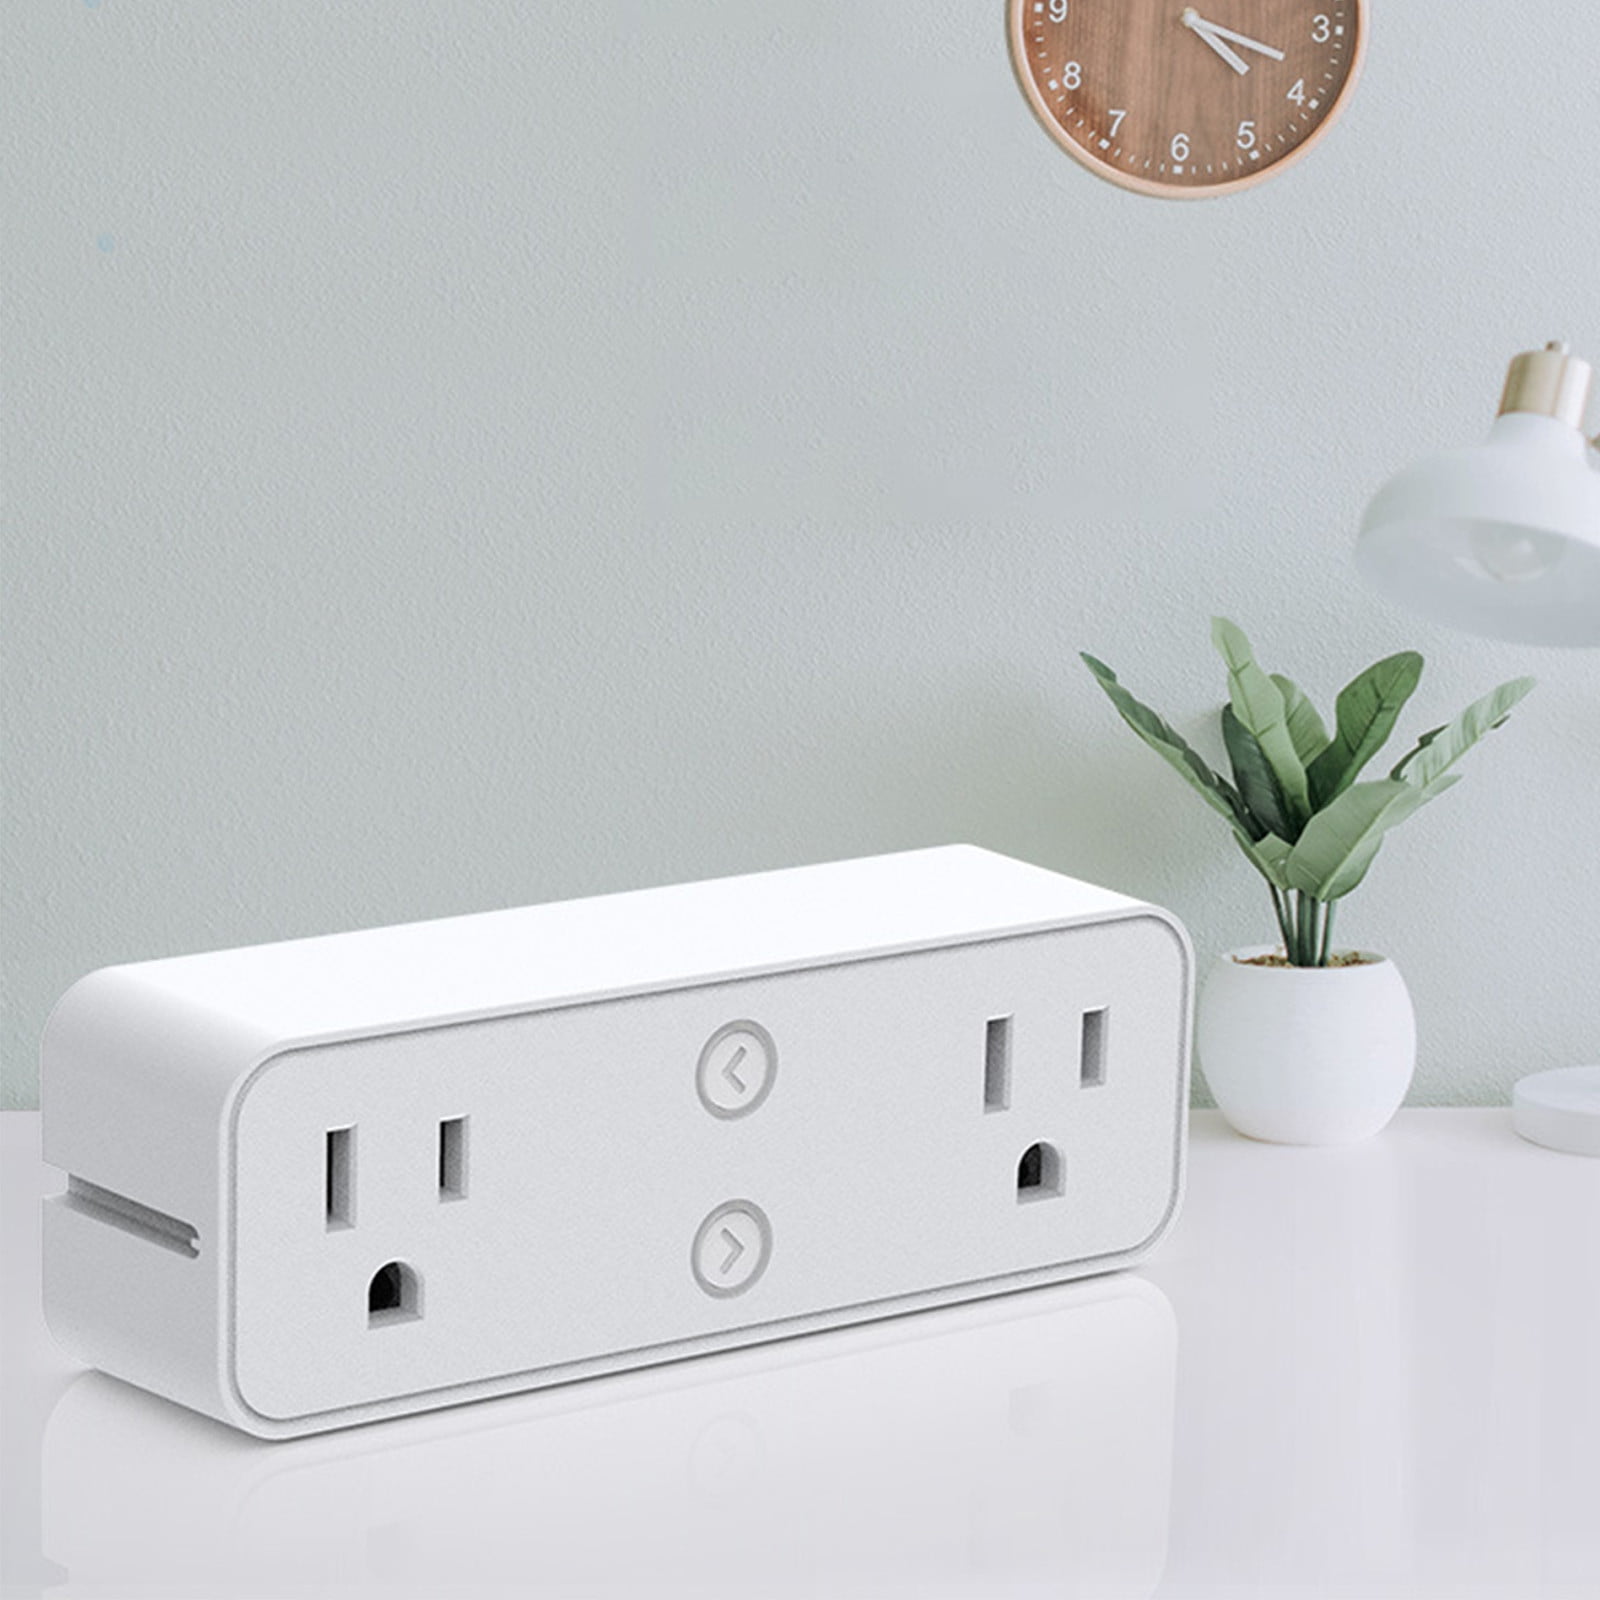 YIFAN Dual Smart Plug 10A, WiFi Bluetooth Outlet Extender Compatible with  Alexa